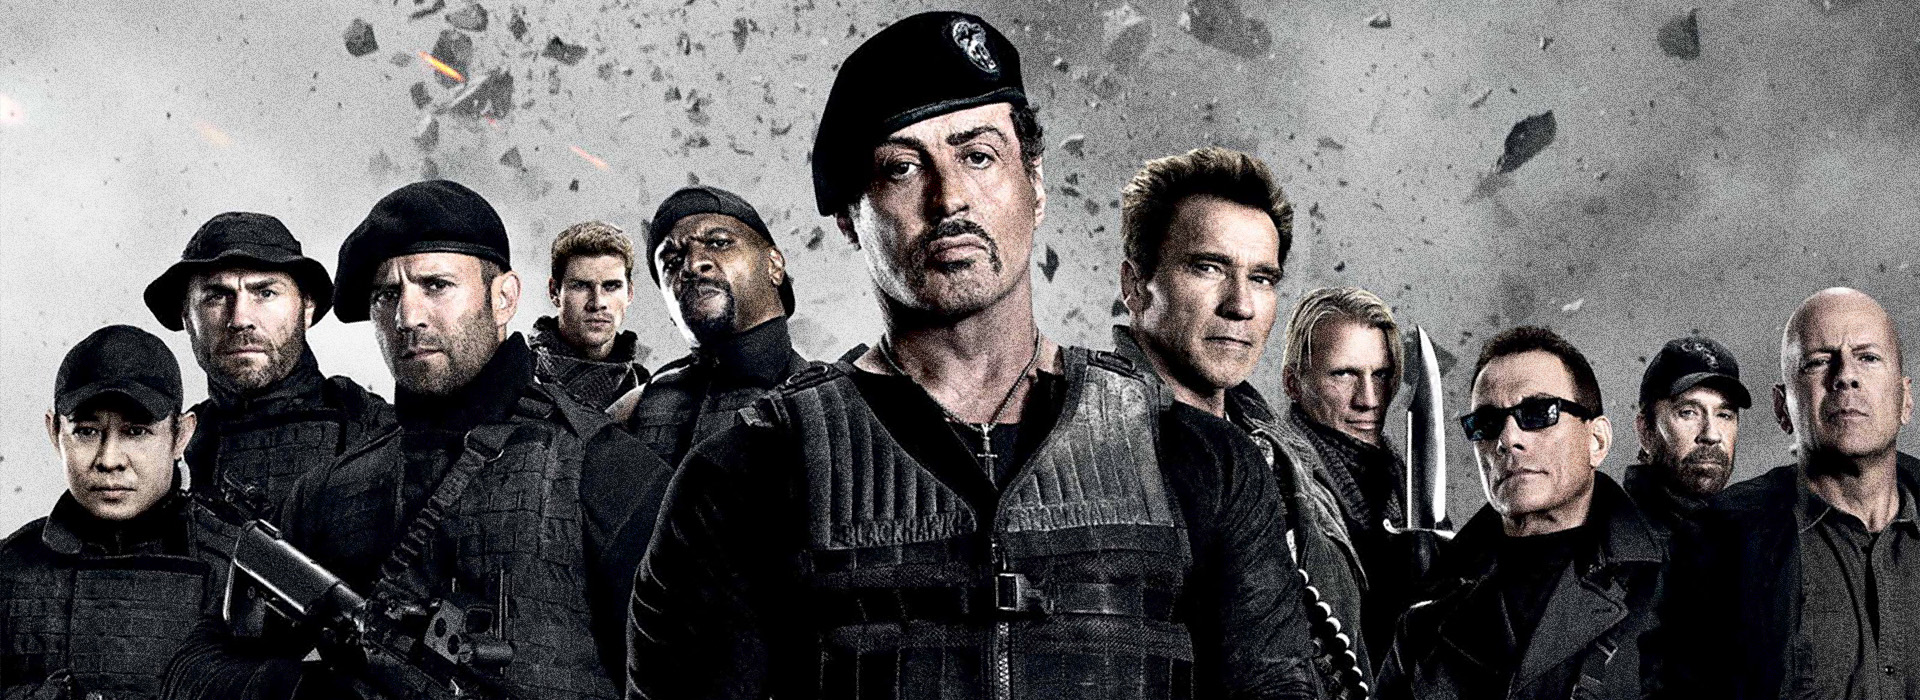 Movie poster The Expendables 2